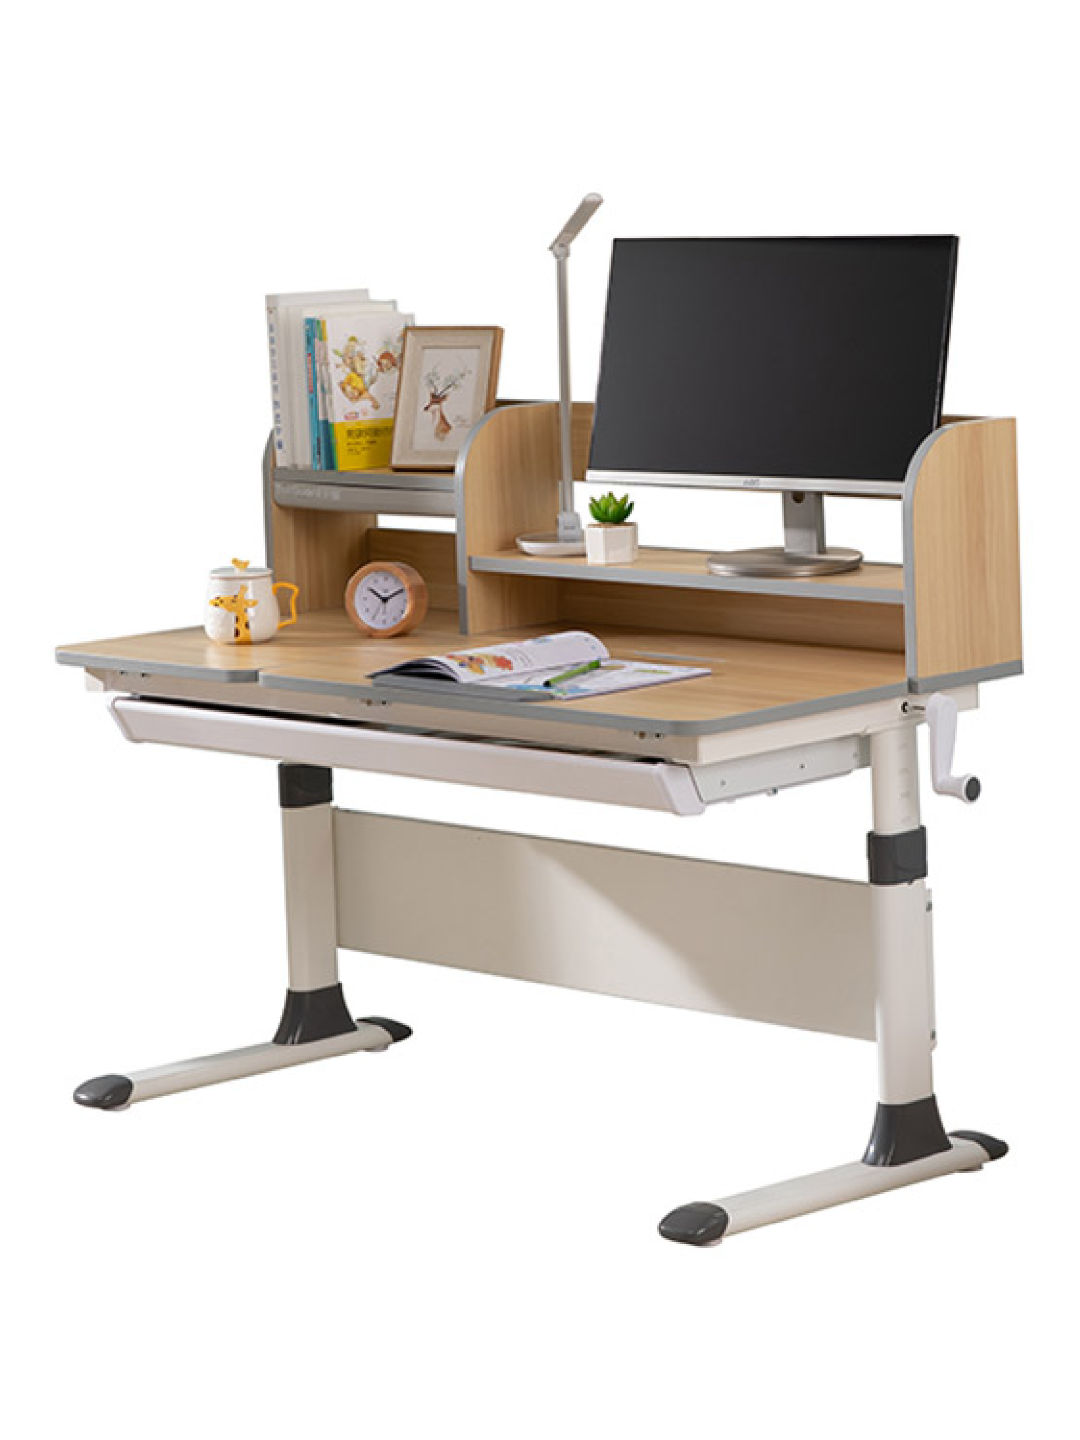 Totguard Woody Study Table